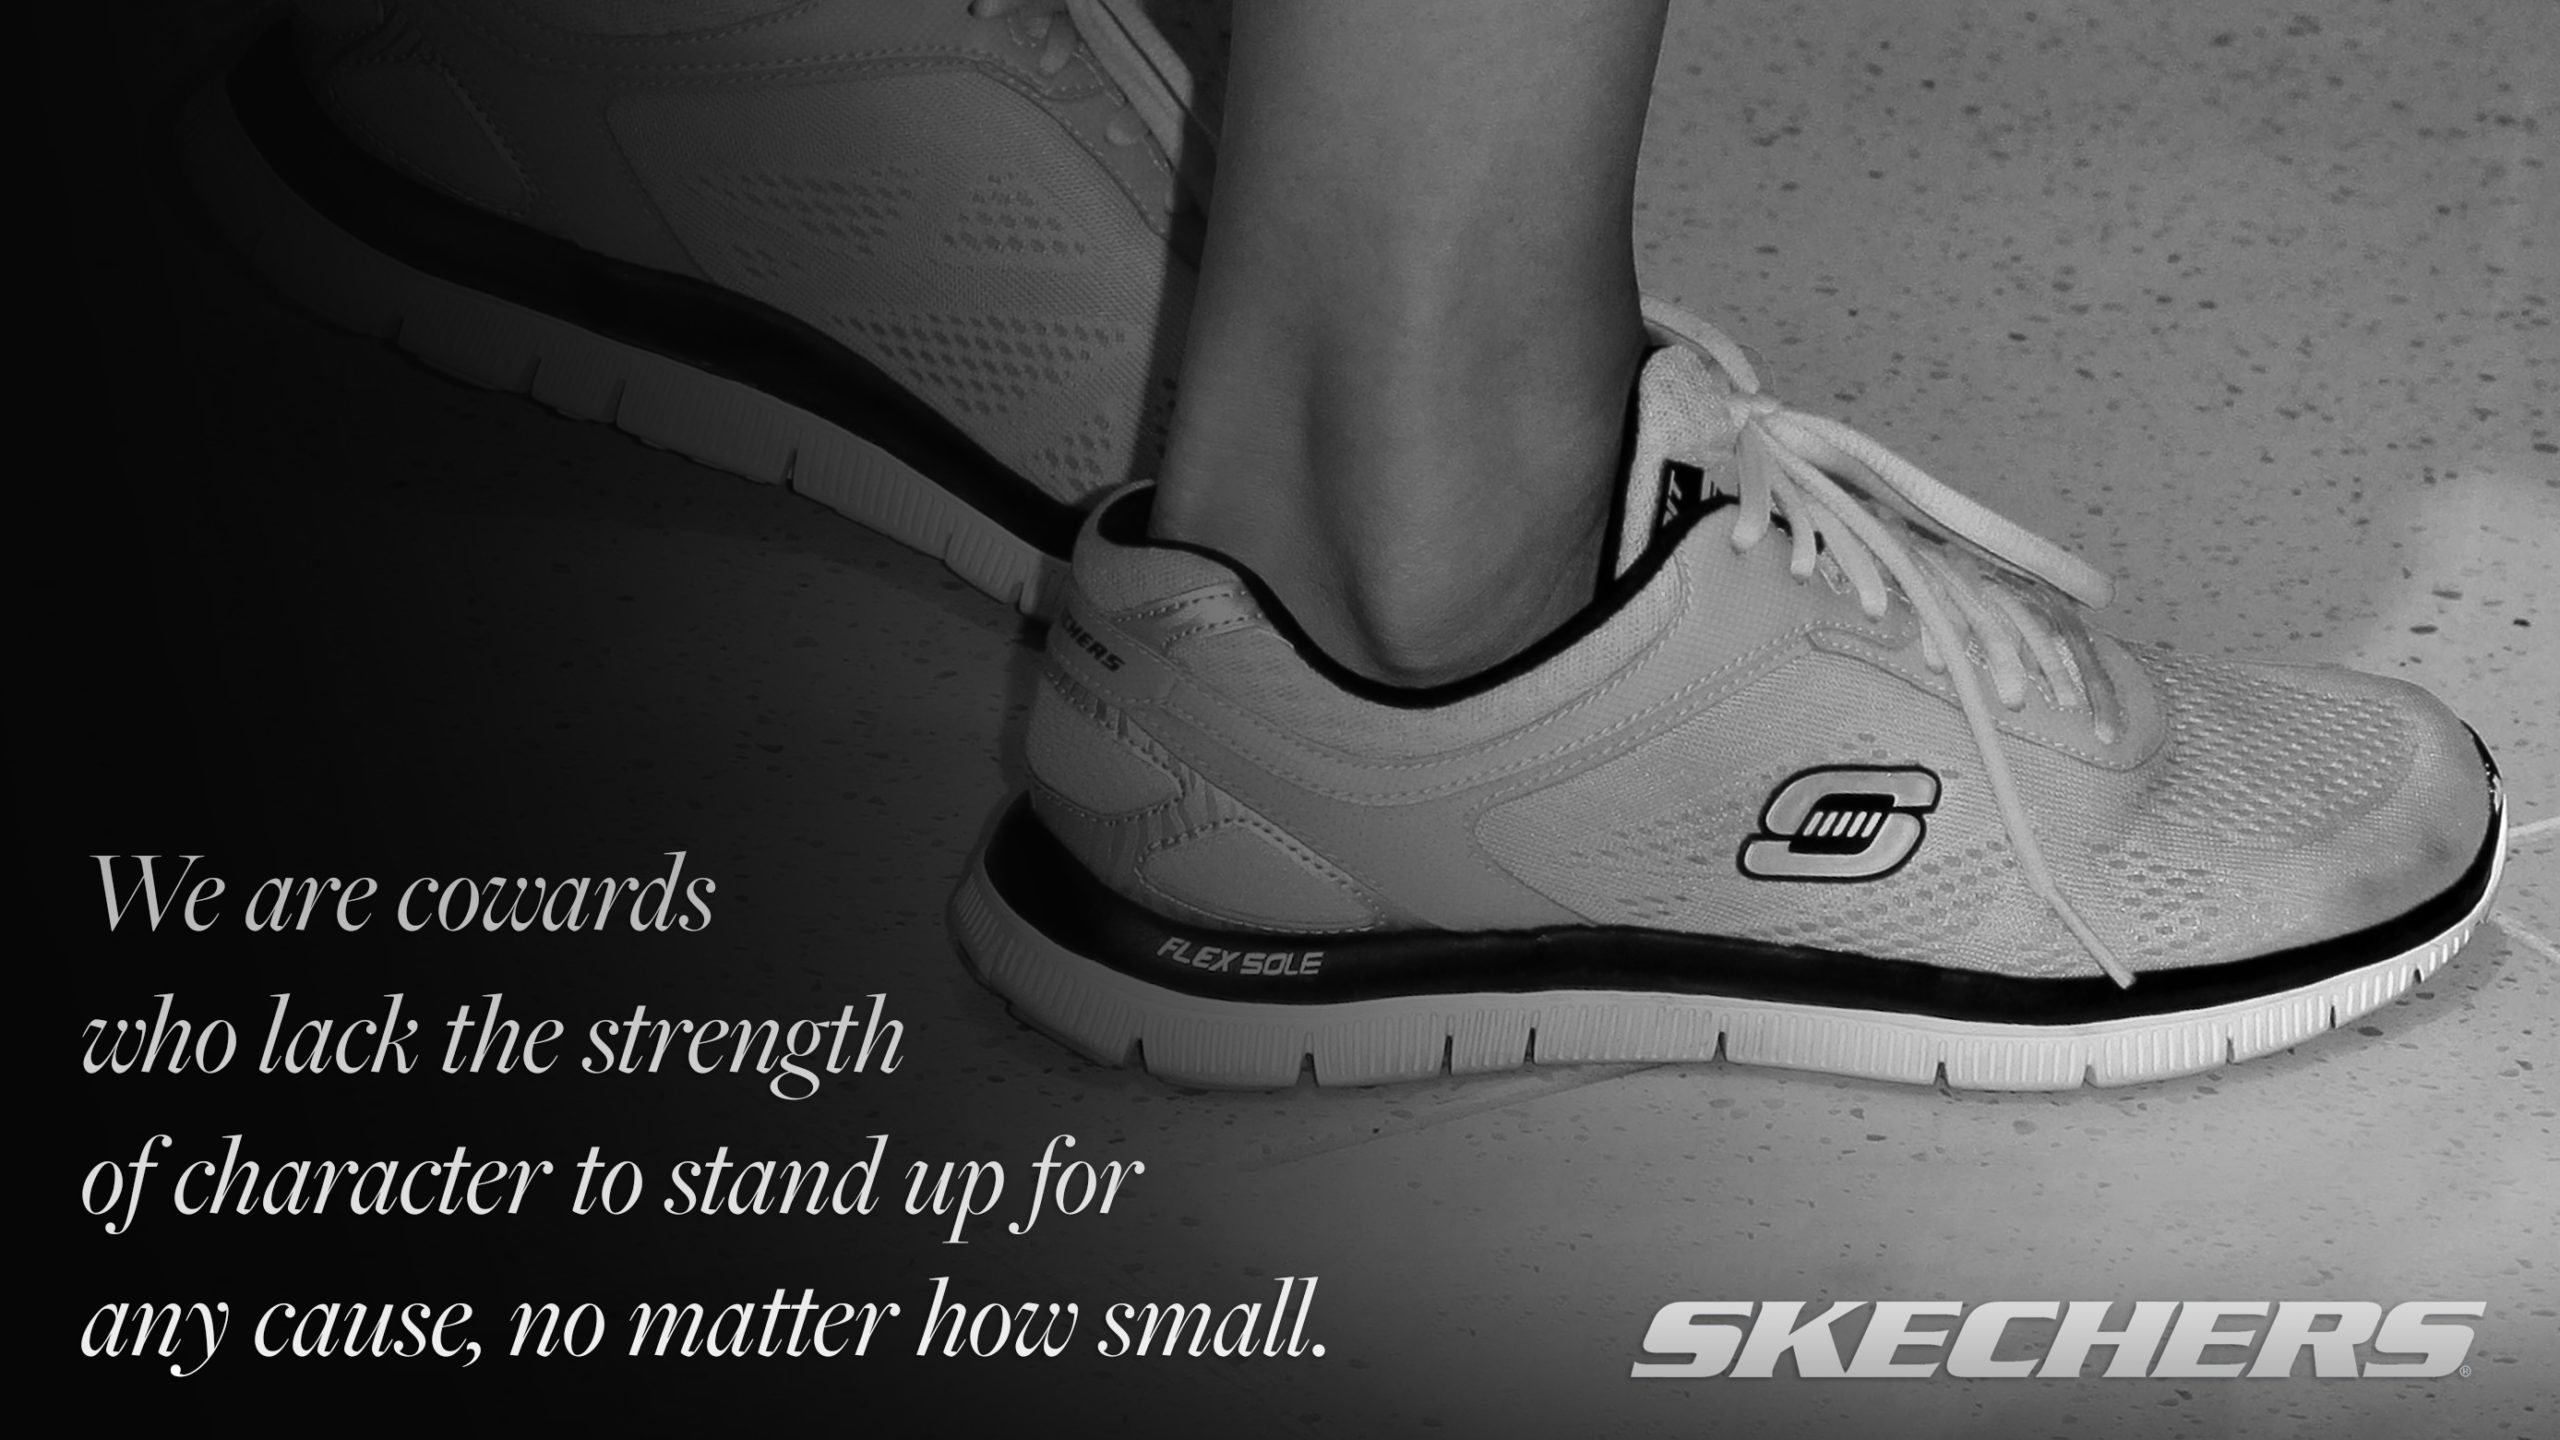 Glat dynasti Cosmic Seizing The Moment: Amid Backlash Over Nike's New Colin Kaepernick Ad,  Skechers Just Released A Commercial Boasting That They're Spineless Cowards  Who Stand For Nothing - ClickHole